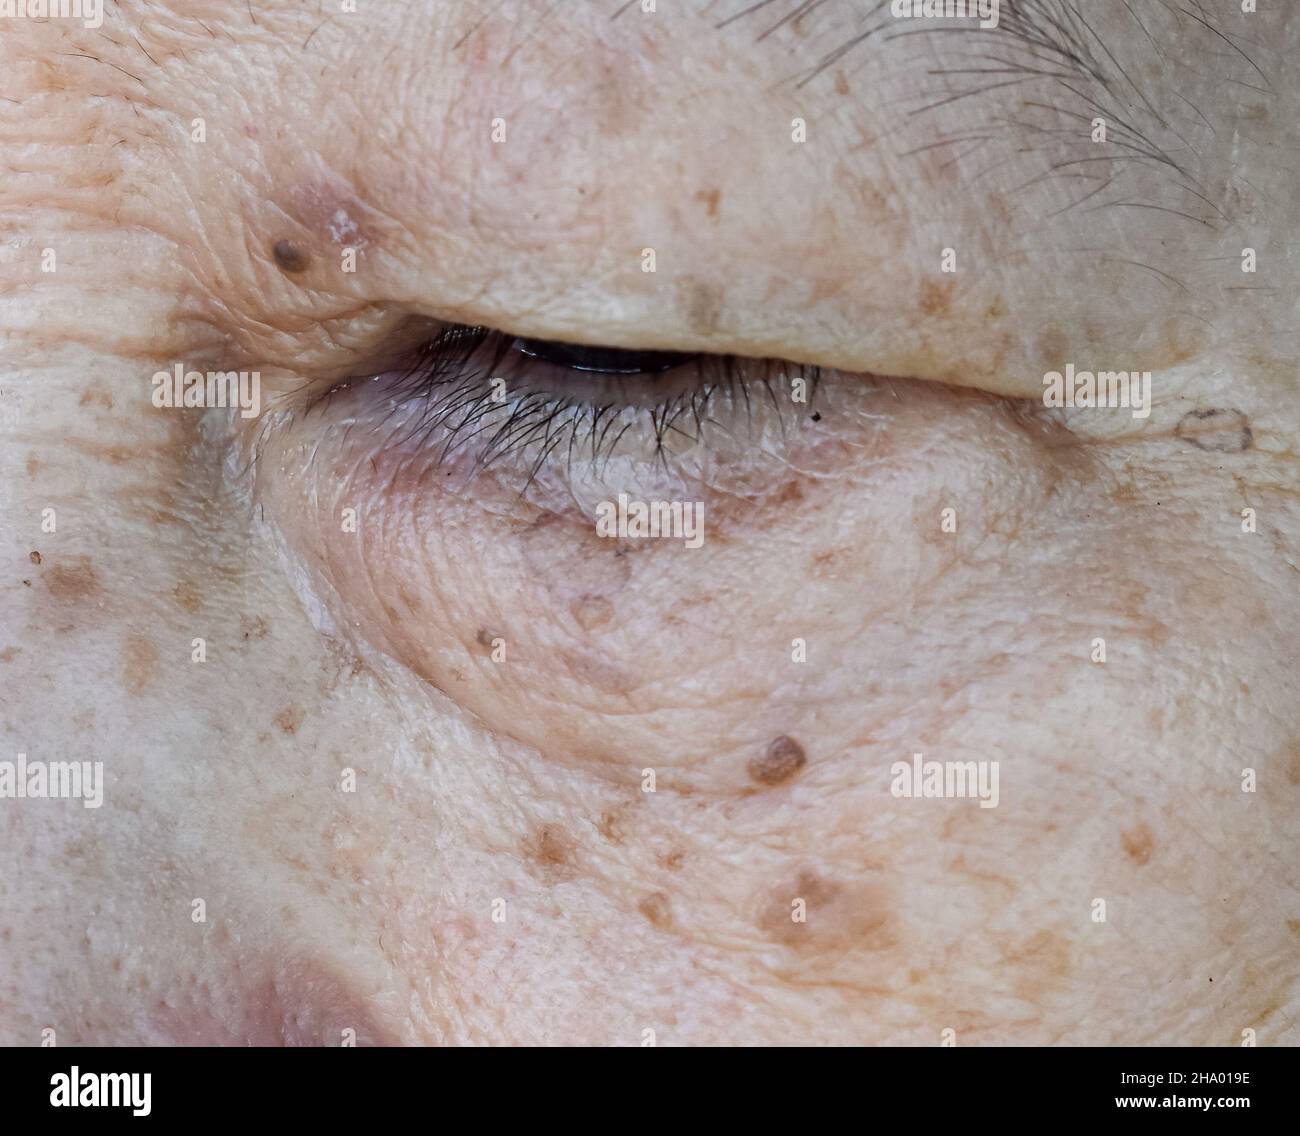 Aging skin folds or skin creases or wrinkles and aging spots at face especially around eye of Southeast Asian, Chinese elderly woman. Closeup view. Stock Photo